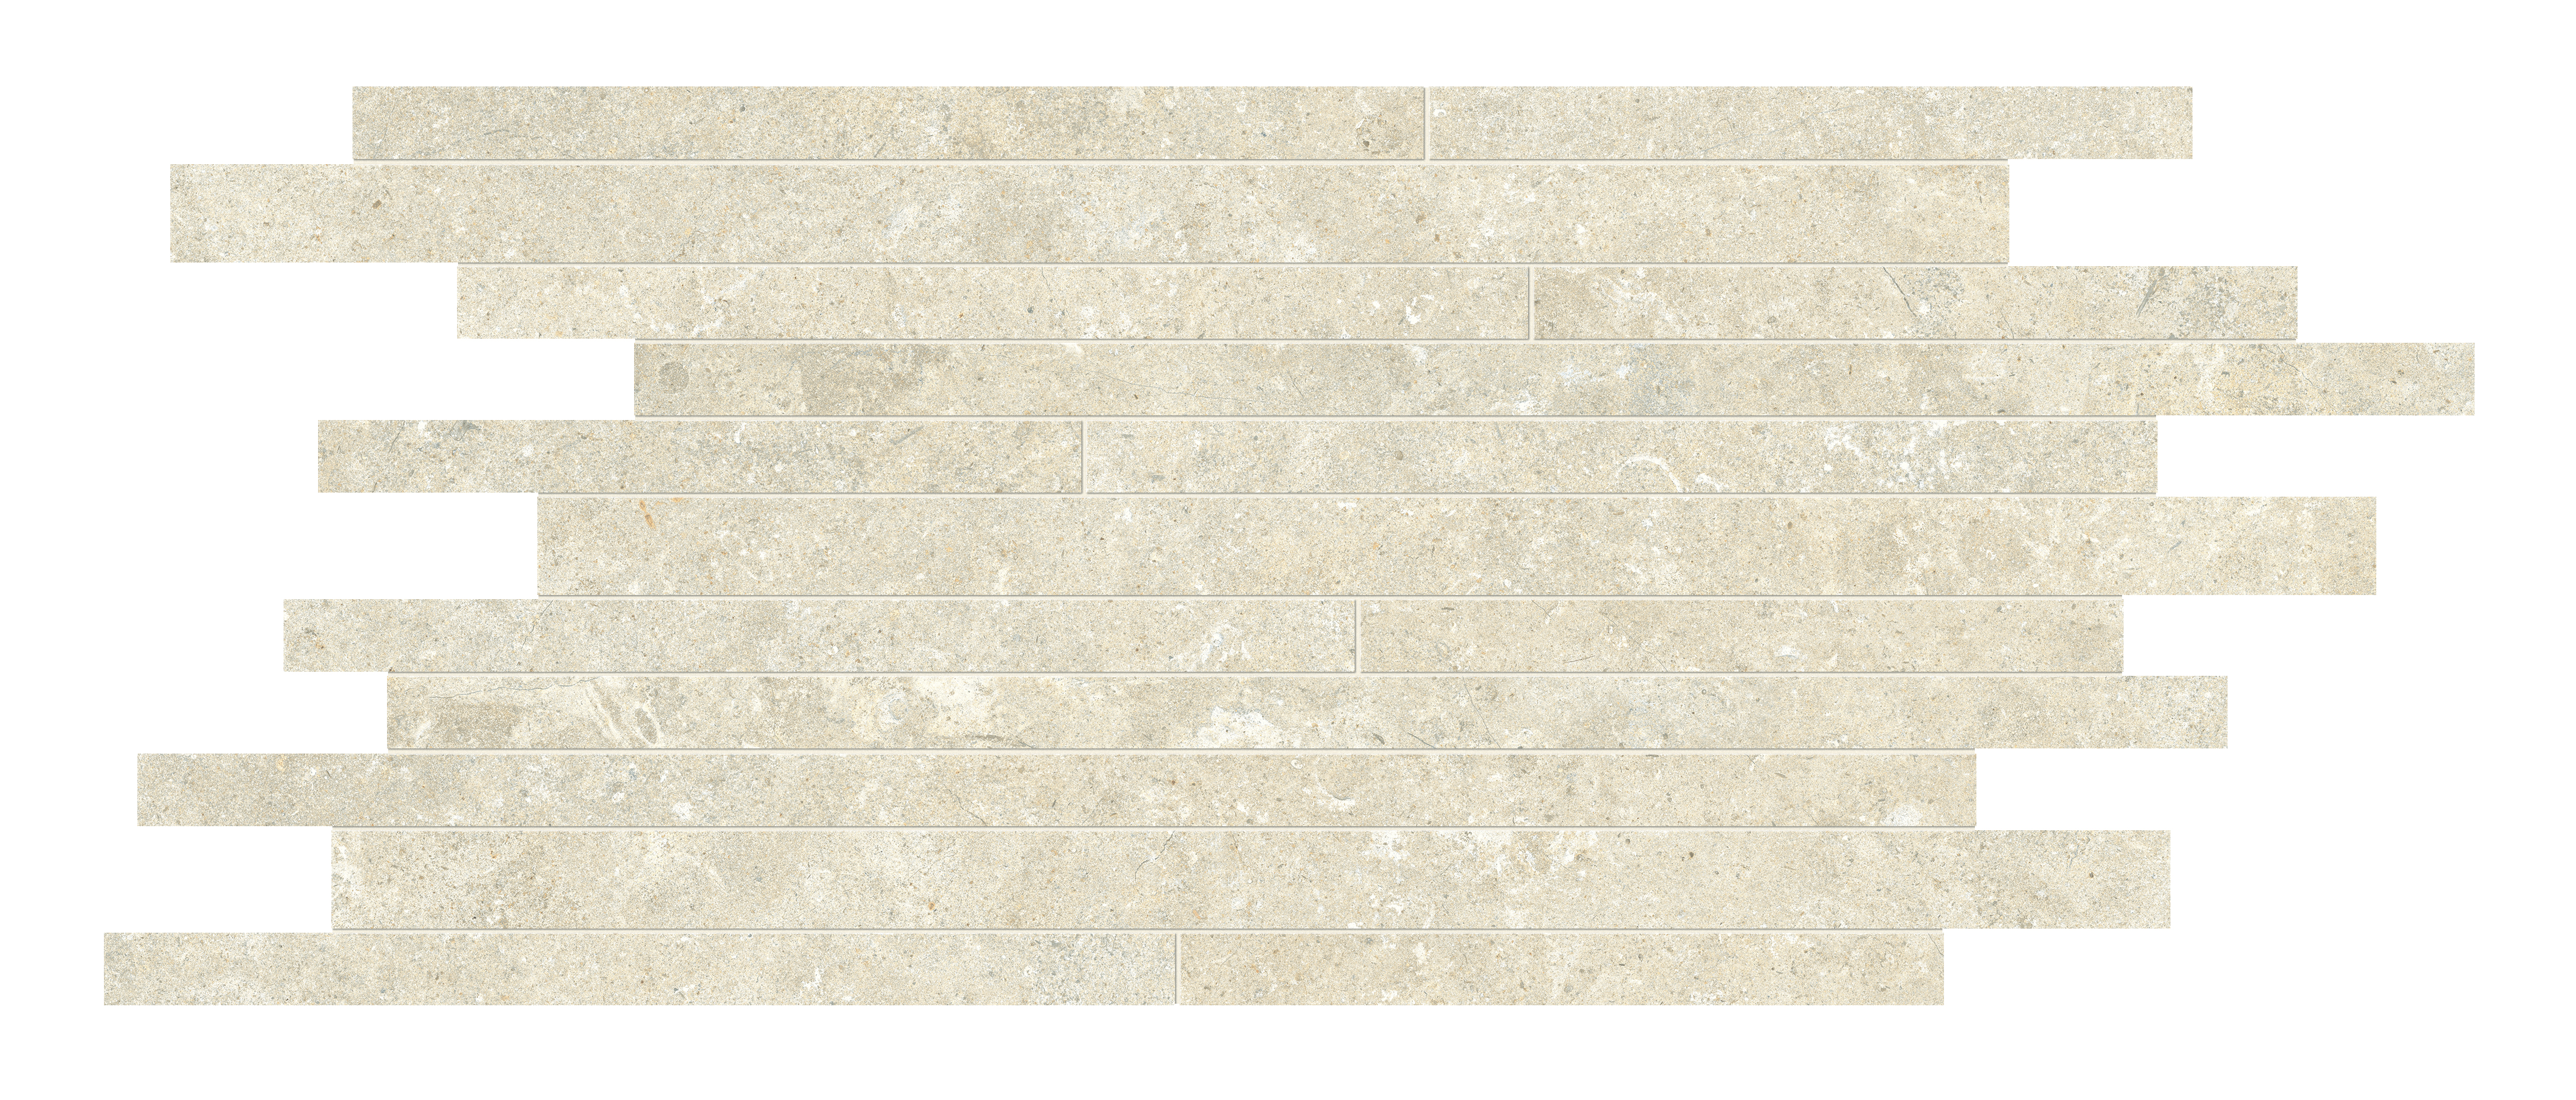 Marca Corona Arkistyle Clay Strutturato Hithick Line Tessere J281 strutturato hithick 30x60cm rectified 9mm